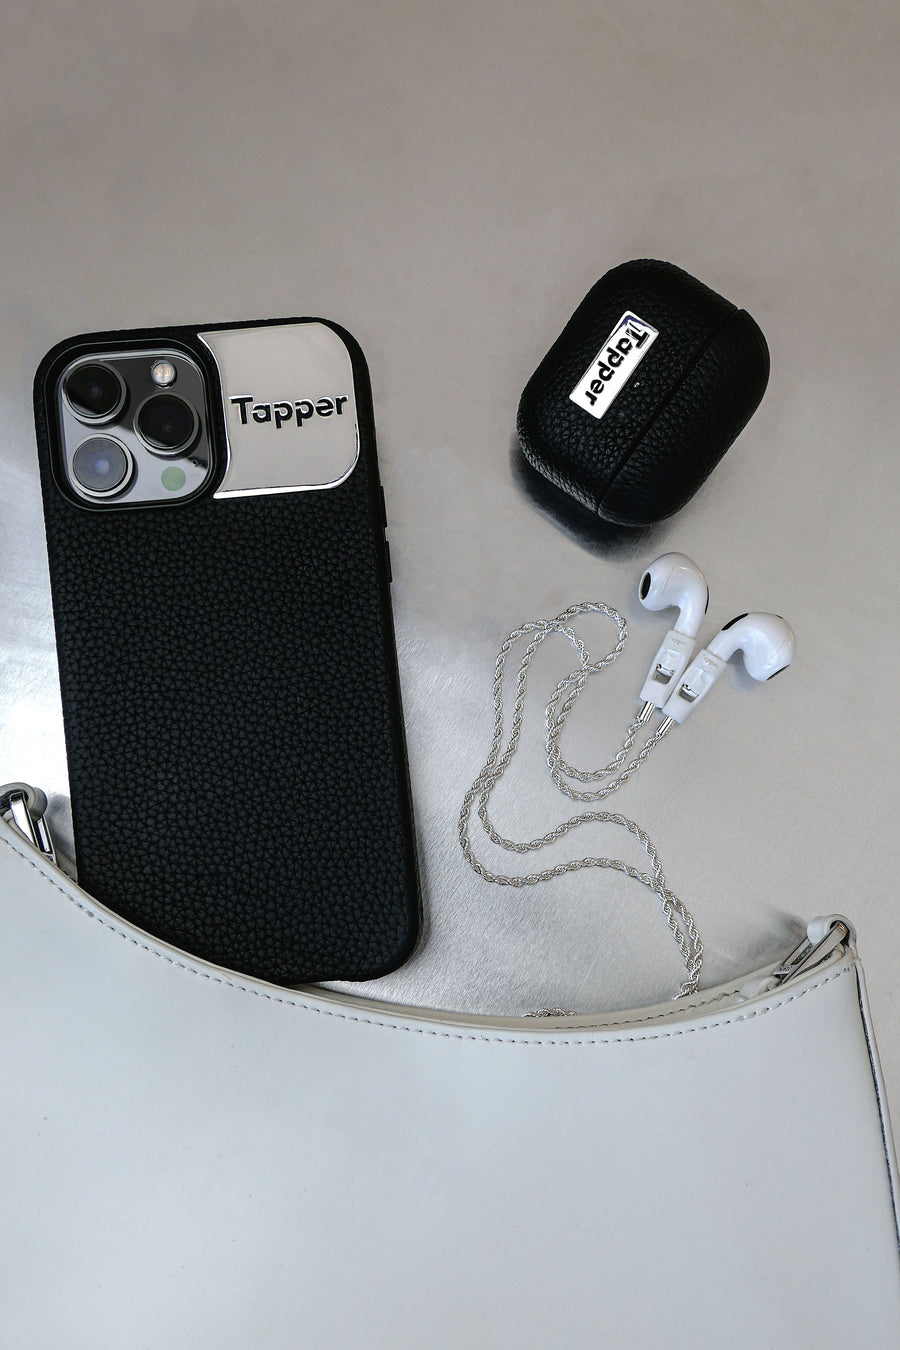 Tapper's luxurious black genuine cow leather AirPods case protects and elevates the look of your AirPods Pro. The luxurious, protective case for AirPods Pro with a metal logo plate colored in silver steps up your AirPods game. The next must-have high end protective Apple AirPods accessory in real leather and metal details. Compatible with AirPods Pro. Designed in Sweden by Tapper. Free Express Shipping at gettapper.com